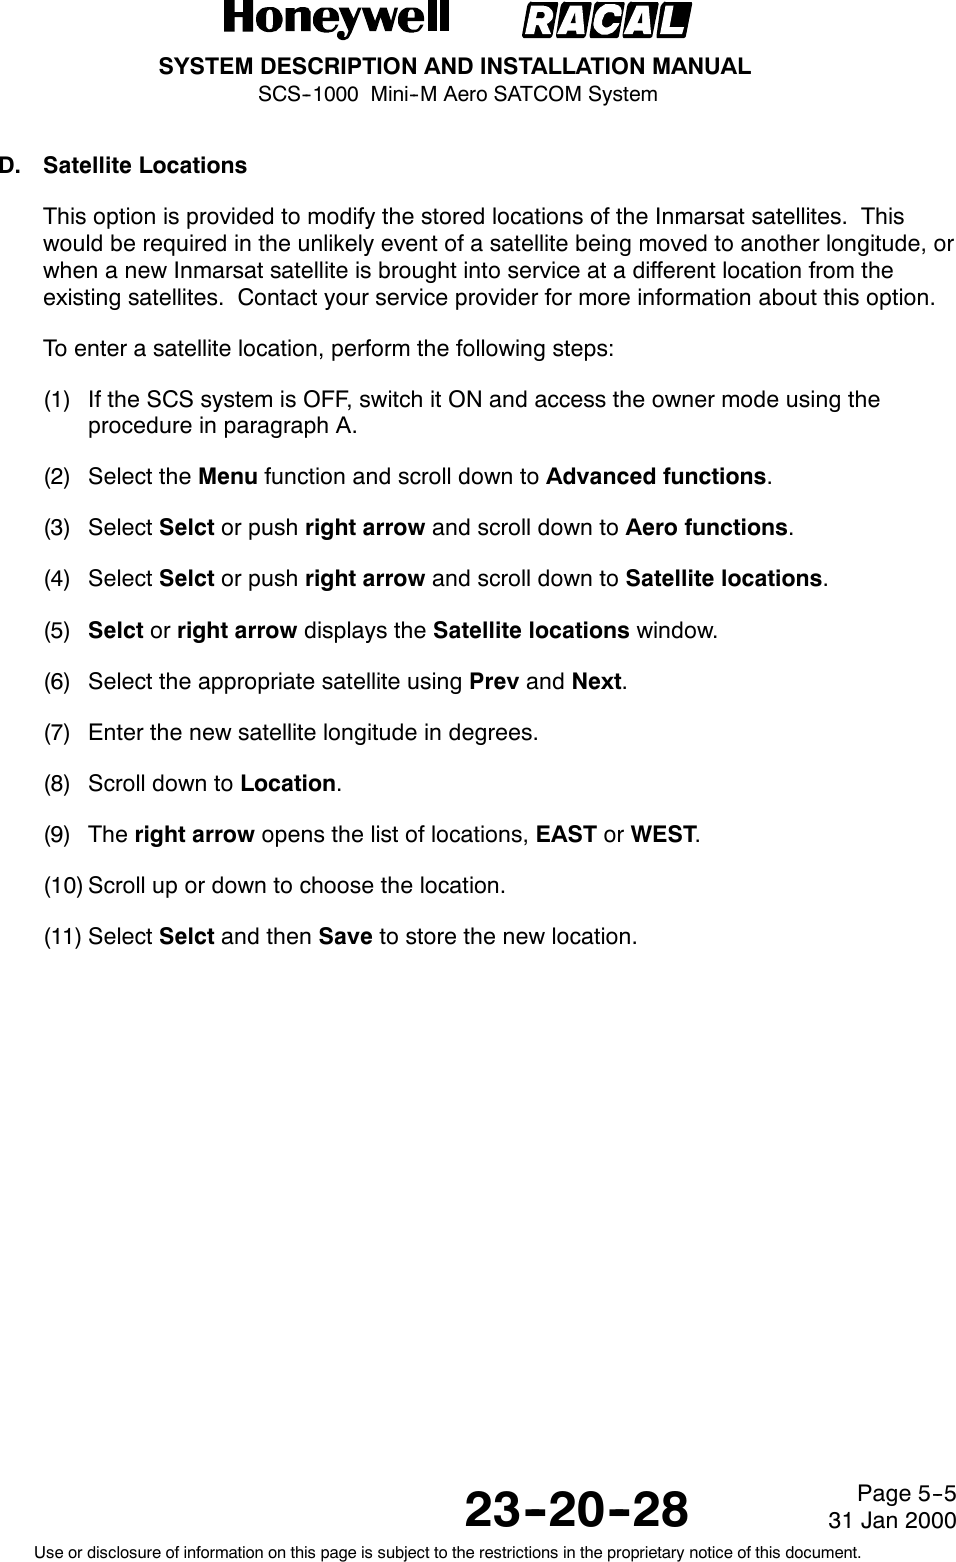 SYSTEM DESCRIPTION AND INSTALLATION MANUALSCS--1000 Mini--M Aero SATCOM System23--20--28Use or disclosure of information on this page is subject to the restrictions in the proprietary notice of this document.Page 5--531 Jan 2000D. Satellite LocationsThis option is provided to modify the stored locations of the Inmarsat satellites. Thiswould be required in the unlikely event of a satellite being moved to another longitude, orwhen a new Inmarsat satellite is brought into service at a different location from theexisting satellites. Contact your service provider for more information about this option.To enter a satellite location, perform the following steps:(1) If the SCS system is OFF, switch it ON and access the owner mode using theprocedure in paragraph A.(2) Select the Menu function and scroll down to Advanced functions.(3) Select Selct or push right arrow and scroll down to Aero functions.(4) Select Selct or push right arrow and scroll down to Satellite locations.(5) Selct or right arrow displays the Satellite locations window.(6) Select the appropriate satellite using Prev and Next.(7) Enter the new satellite longitude in degrees.(8) Scroll down to Location.(9) The right arrow opens the list of locations, EAST or WEST.(10) Scroll up or down to choose the location.(11) Select Selct and then Save to store the new location.